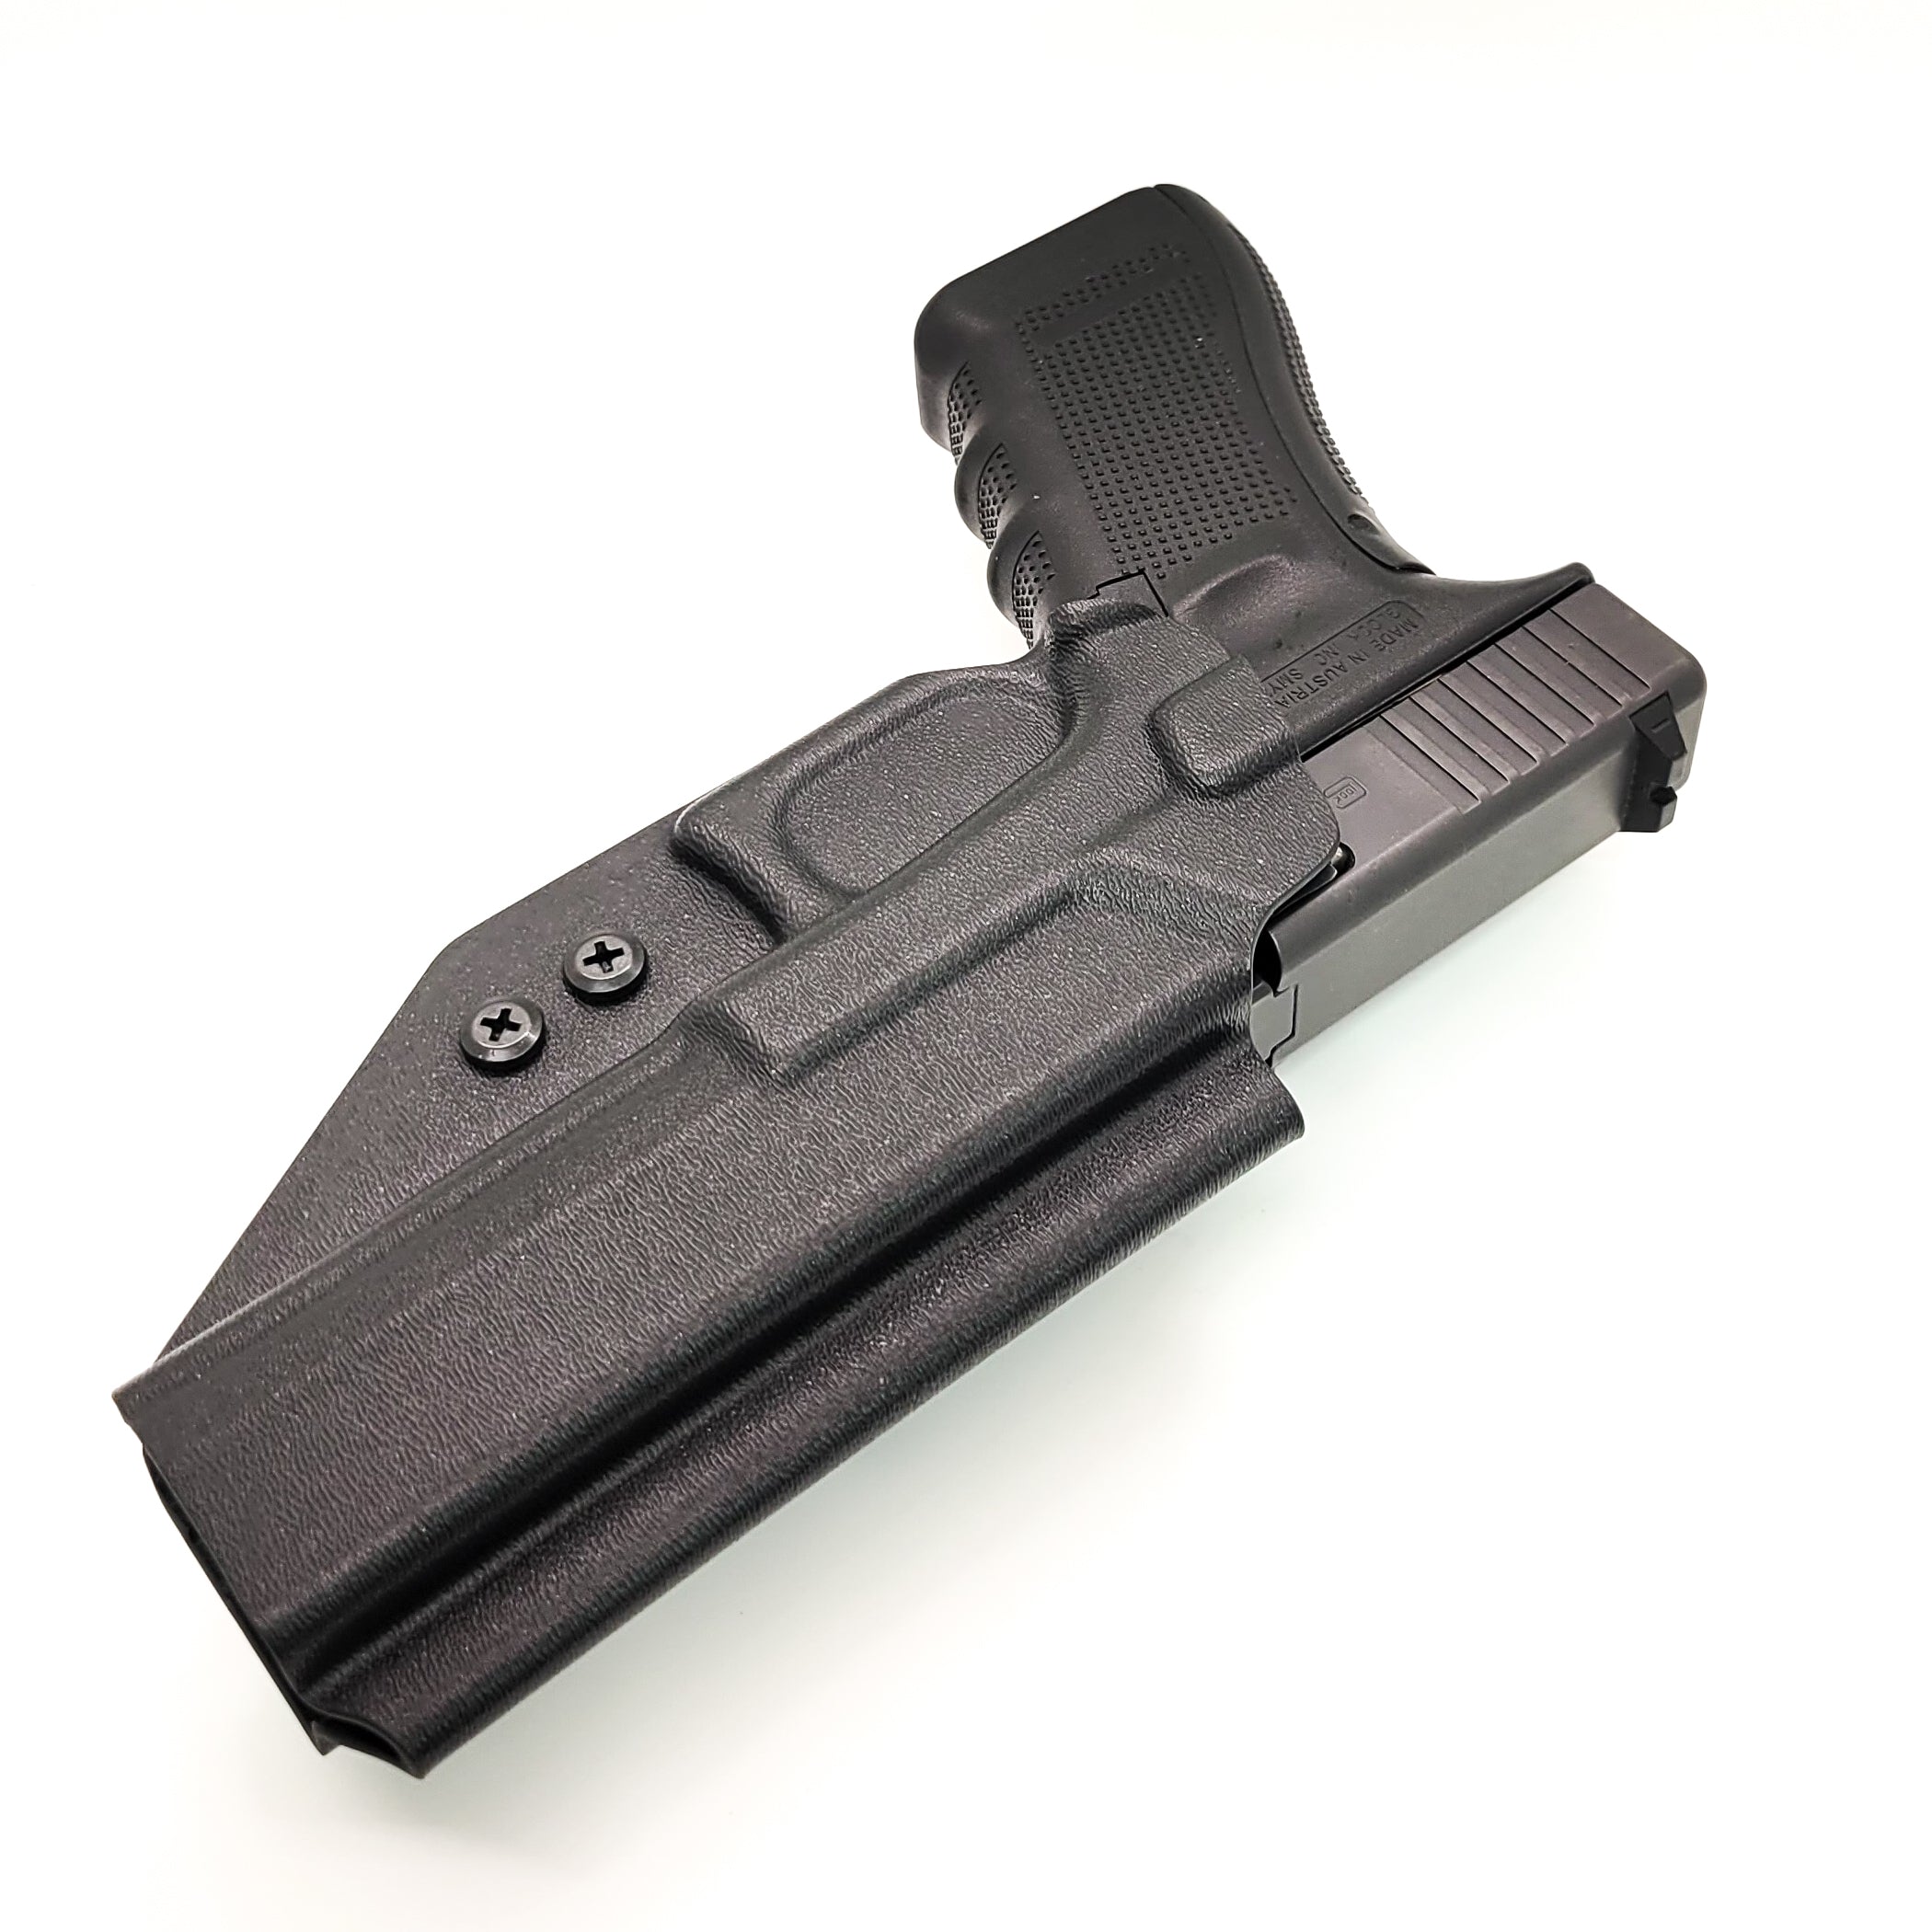 For the best outside waistband OWB holster for the Glock 34 Generation Gen 5, shop Four Brothers Holsters. Glock Gen 3 & 4 22, 17 MOS, Gen 3, 4 & 5 19, 23, 45 9mm Glock full size 9mm and 40 S&W frame pistols. The holster is cleared for a red dot sight. Adjustable Retention, molded with .080" Kydex, made in the USA.